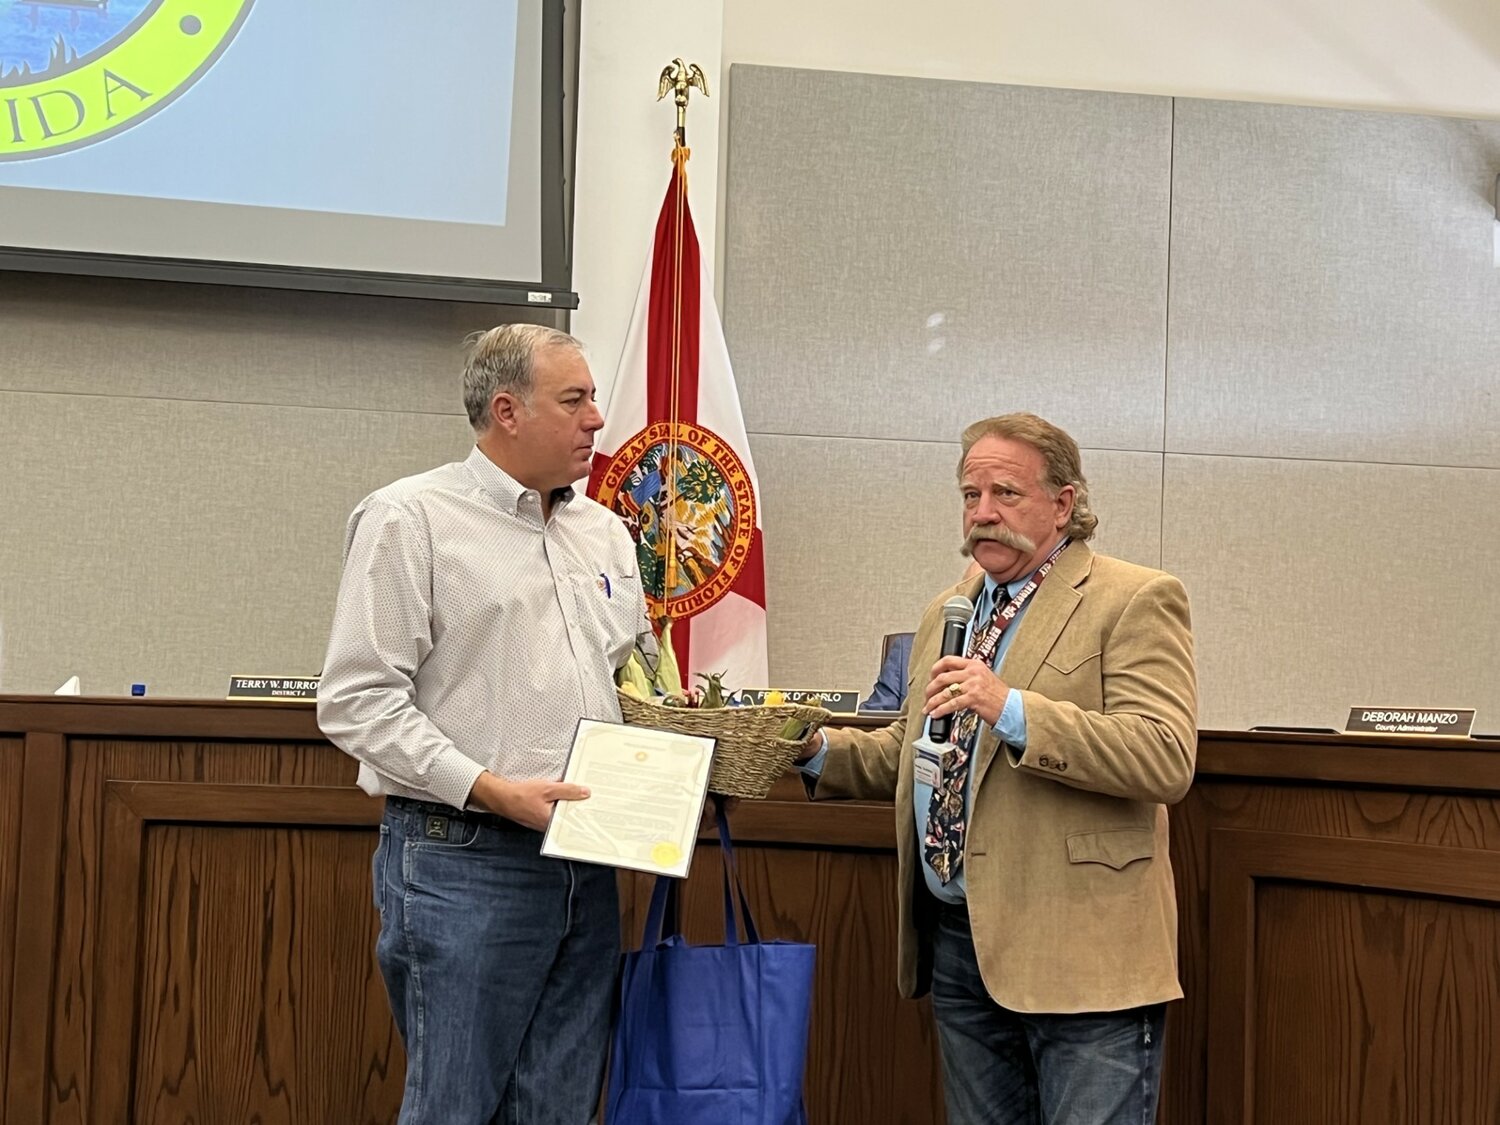 OKEECHOBEE -- Micky Bandi of Florida Farm Bureau (left) accepted the City Farm Week proclamation from Commissioner Brad Goodbread (right) at the Nov. 9 commission meeting.